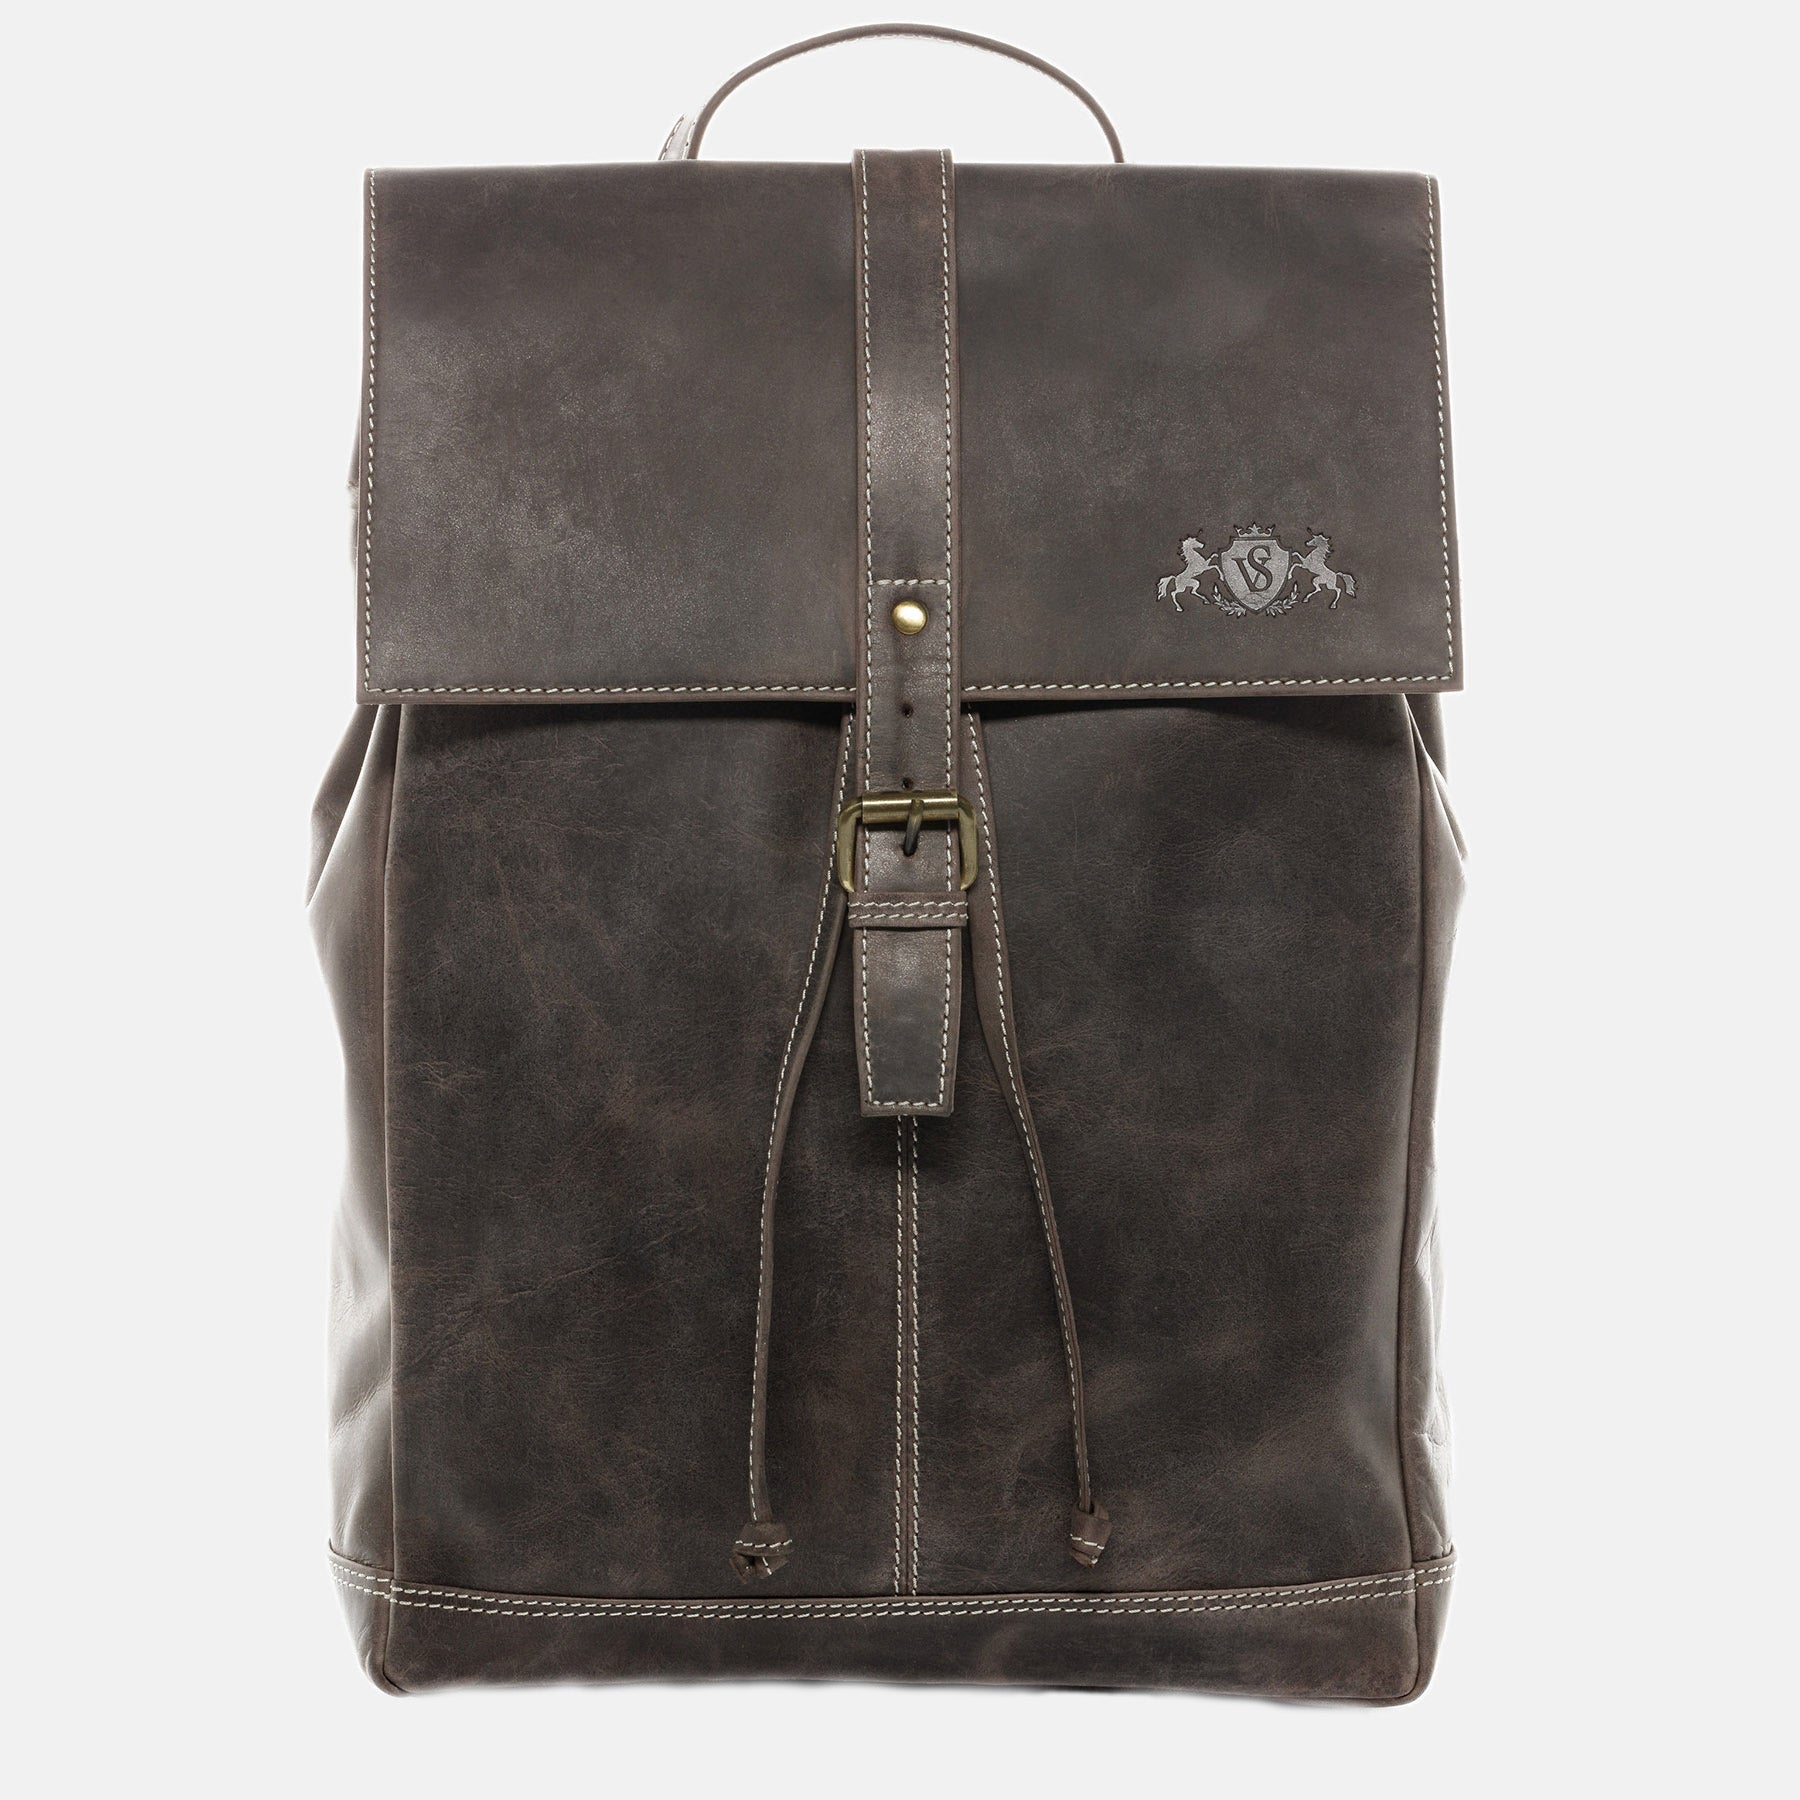 City backpack STAN buffalo leather brown